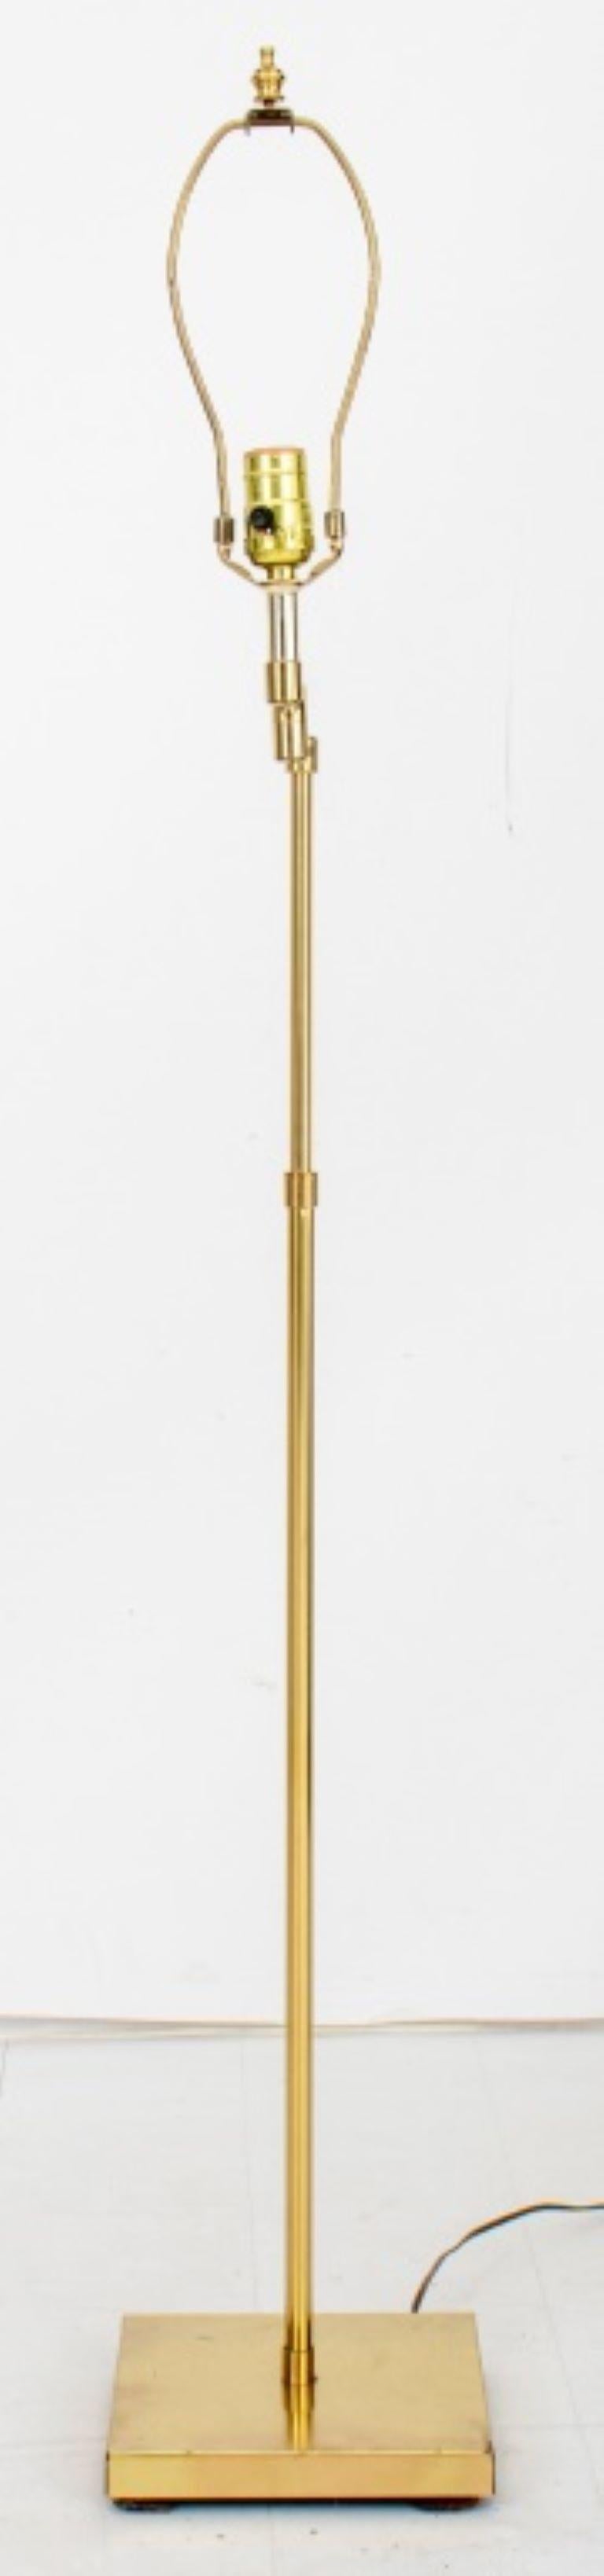 Brass swing-arm floor lamp, height adjustable, unmarked. Leaning to one side. 

Dealer: S138XX